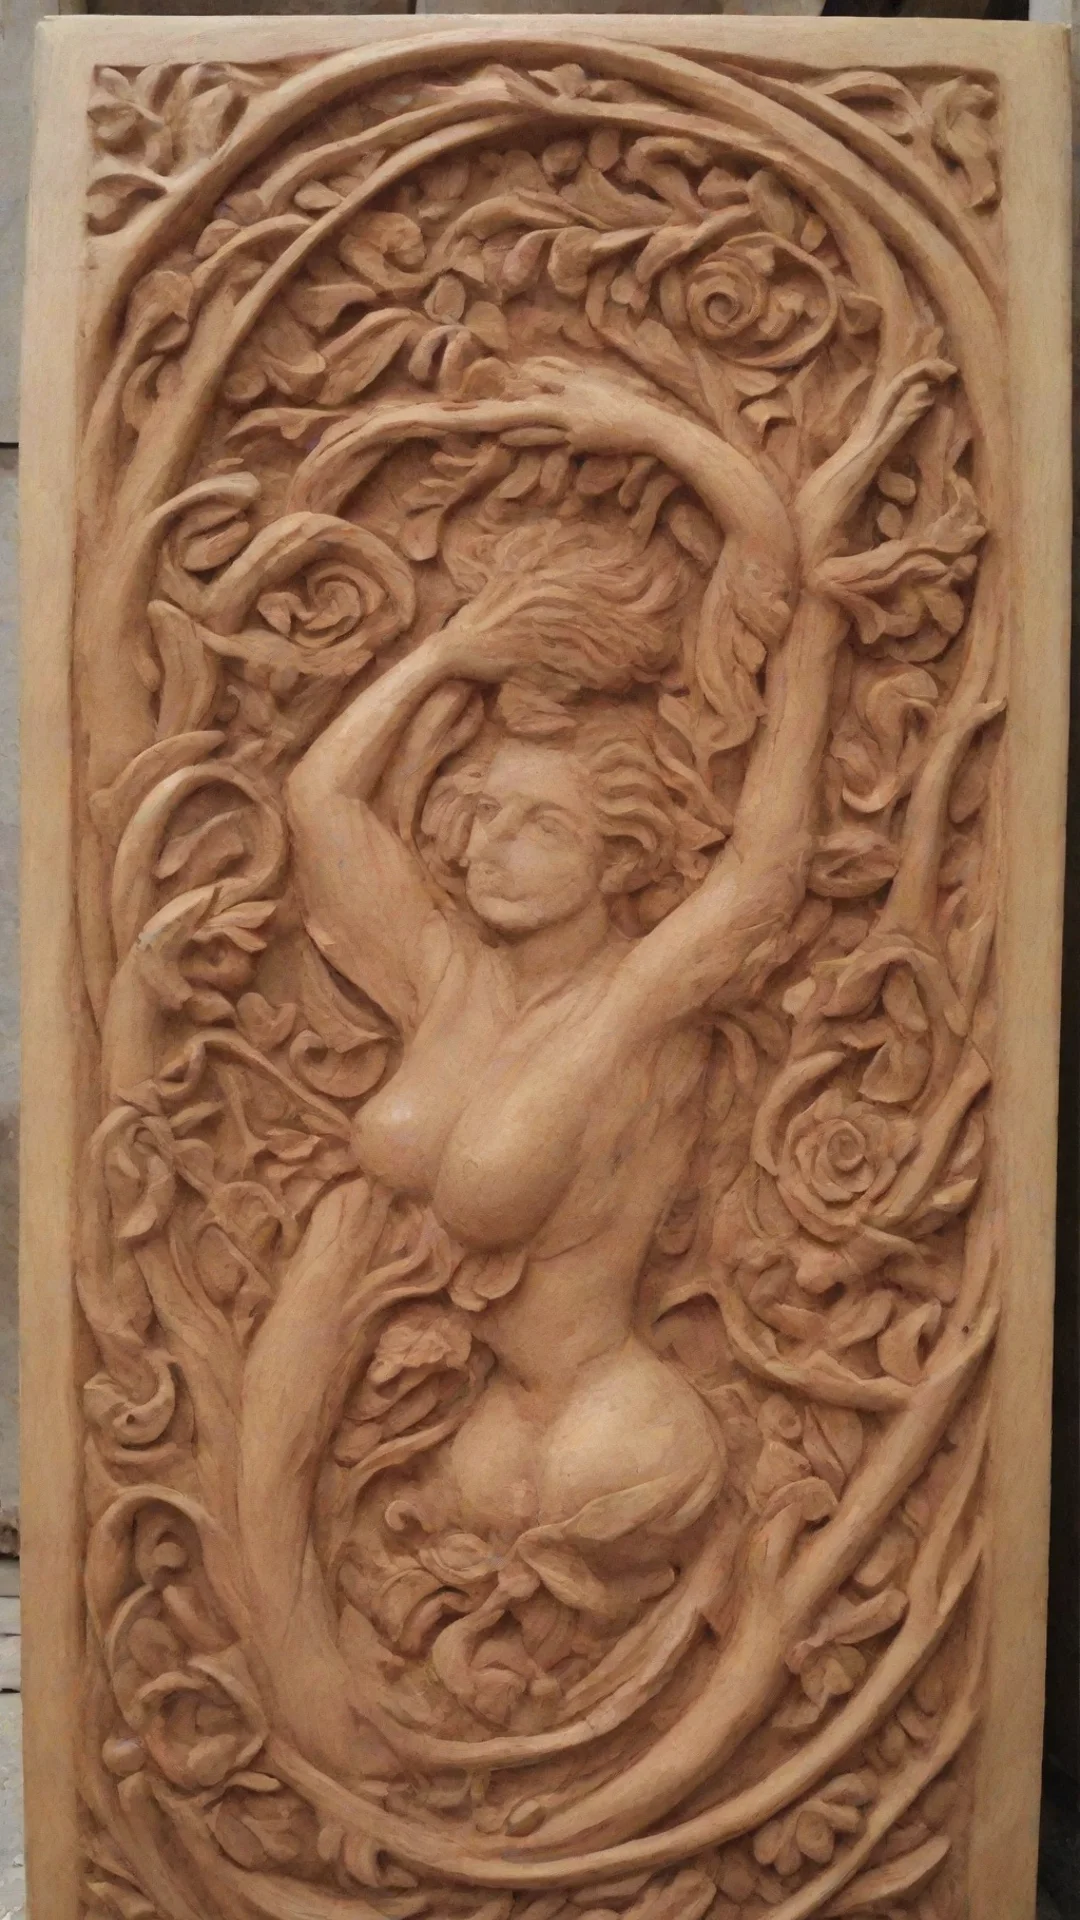 aiamazing satisfying wood carving awesome portrait 2 tall